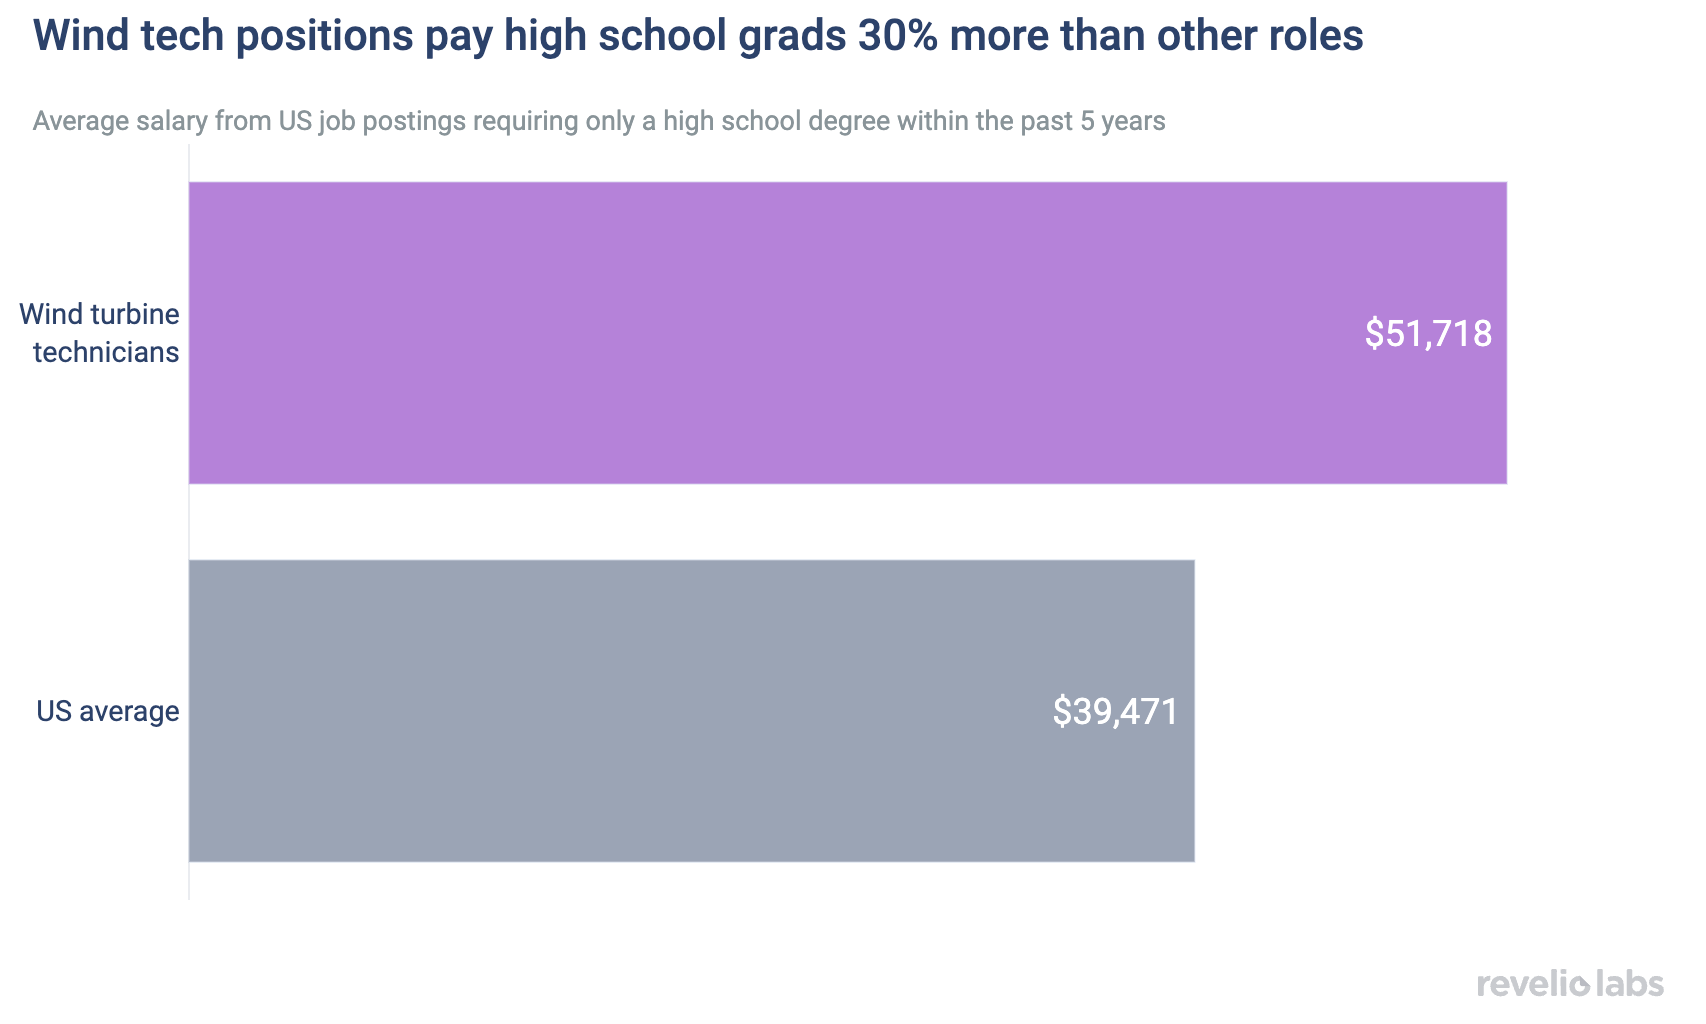 Wind tech positions pay high school grads 30% more than other roles